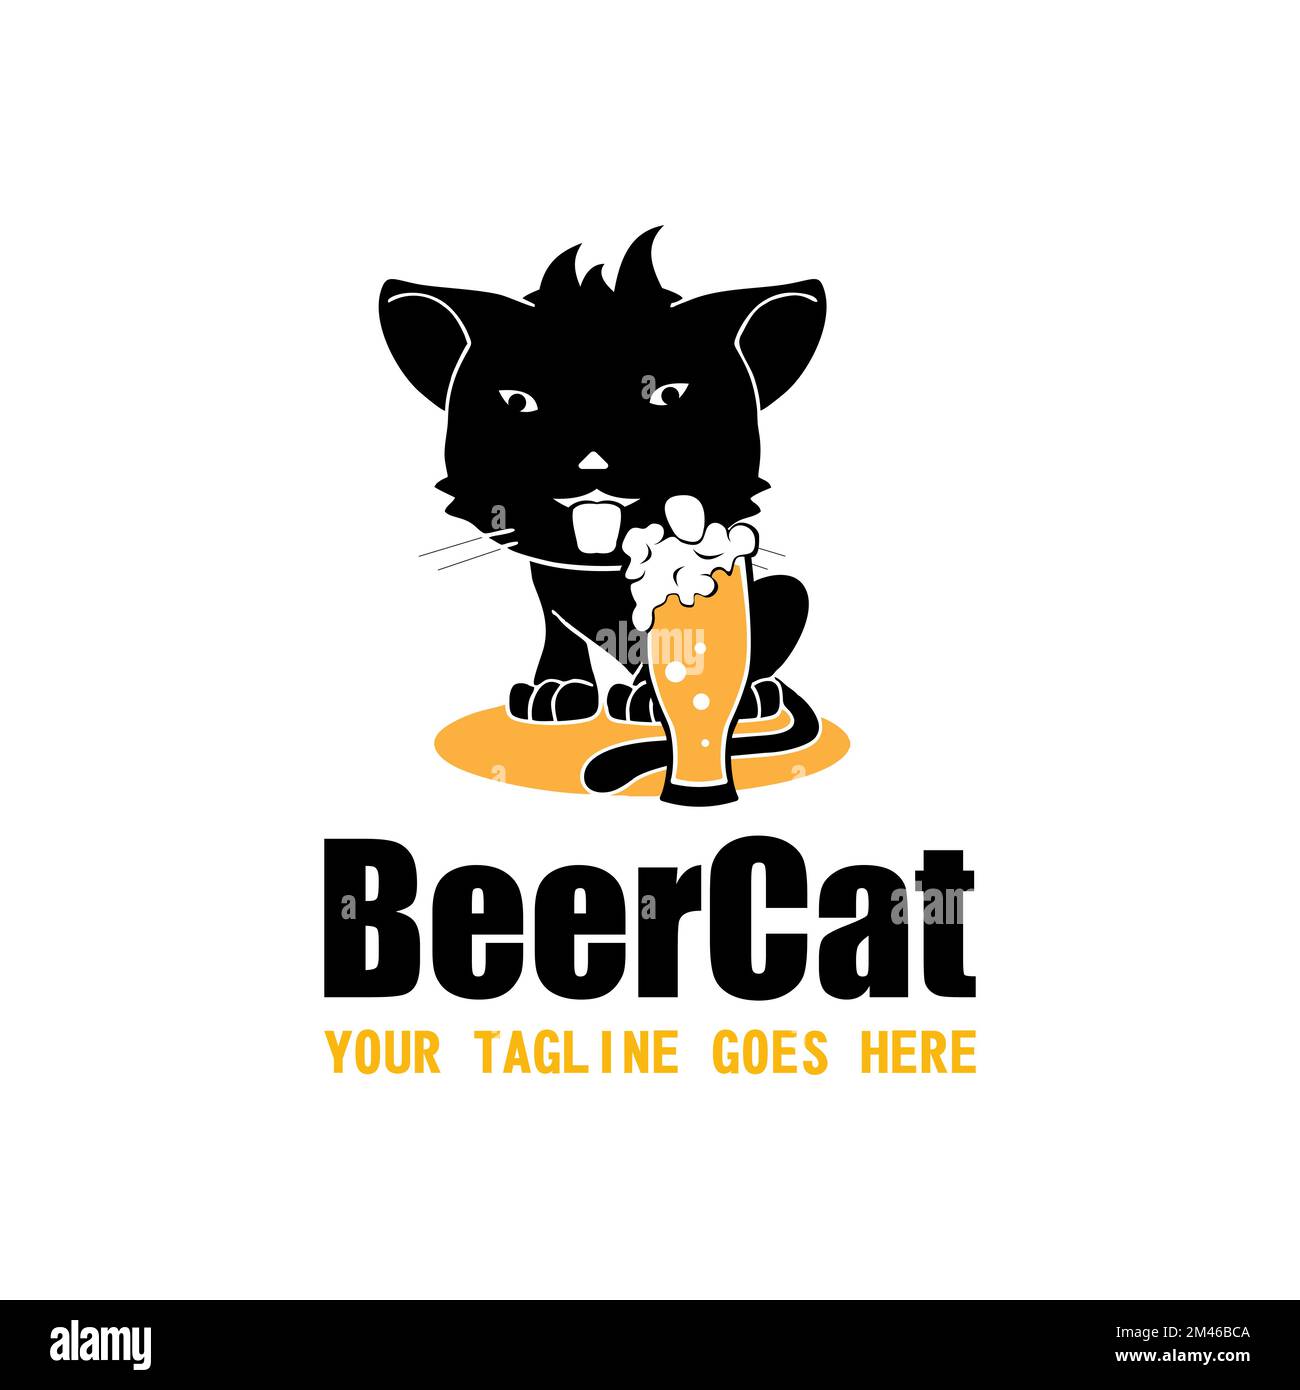 beer glass and black cat drunk image graphic icon logo design abstract concept vector stock. Can be used as symbols related to animal or drink. Stock Vector